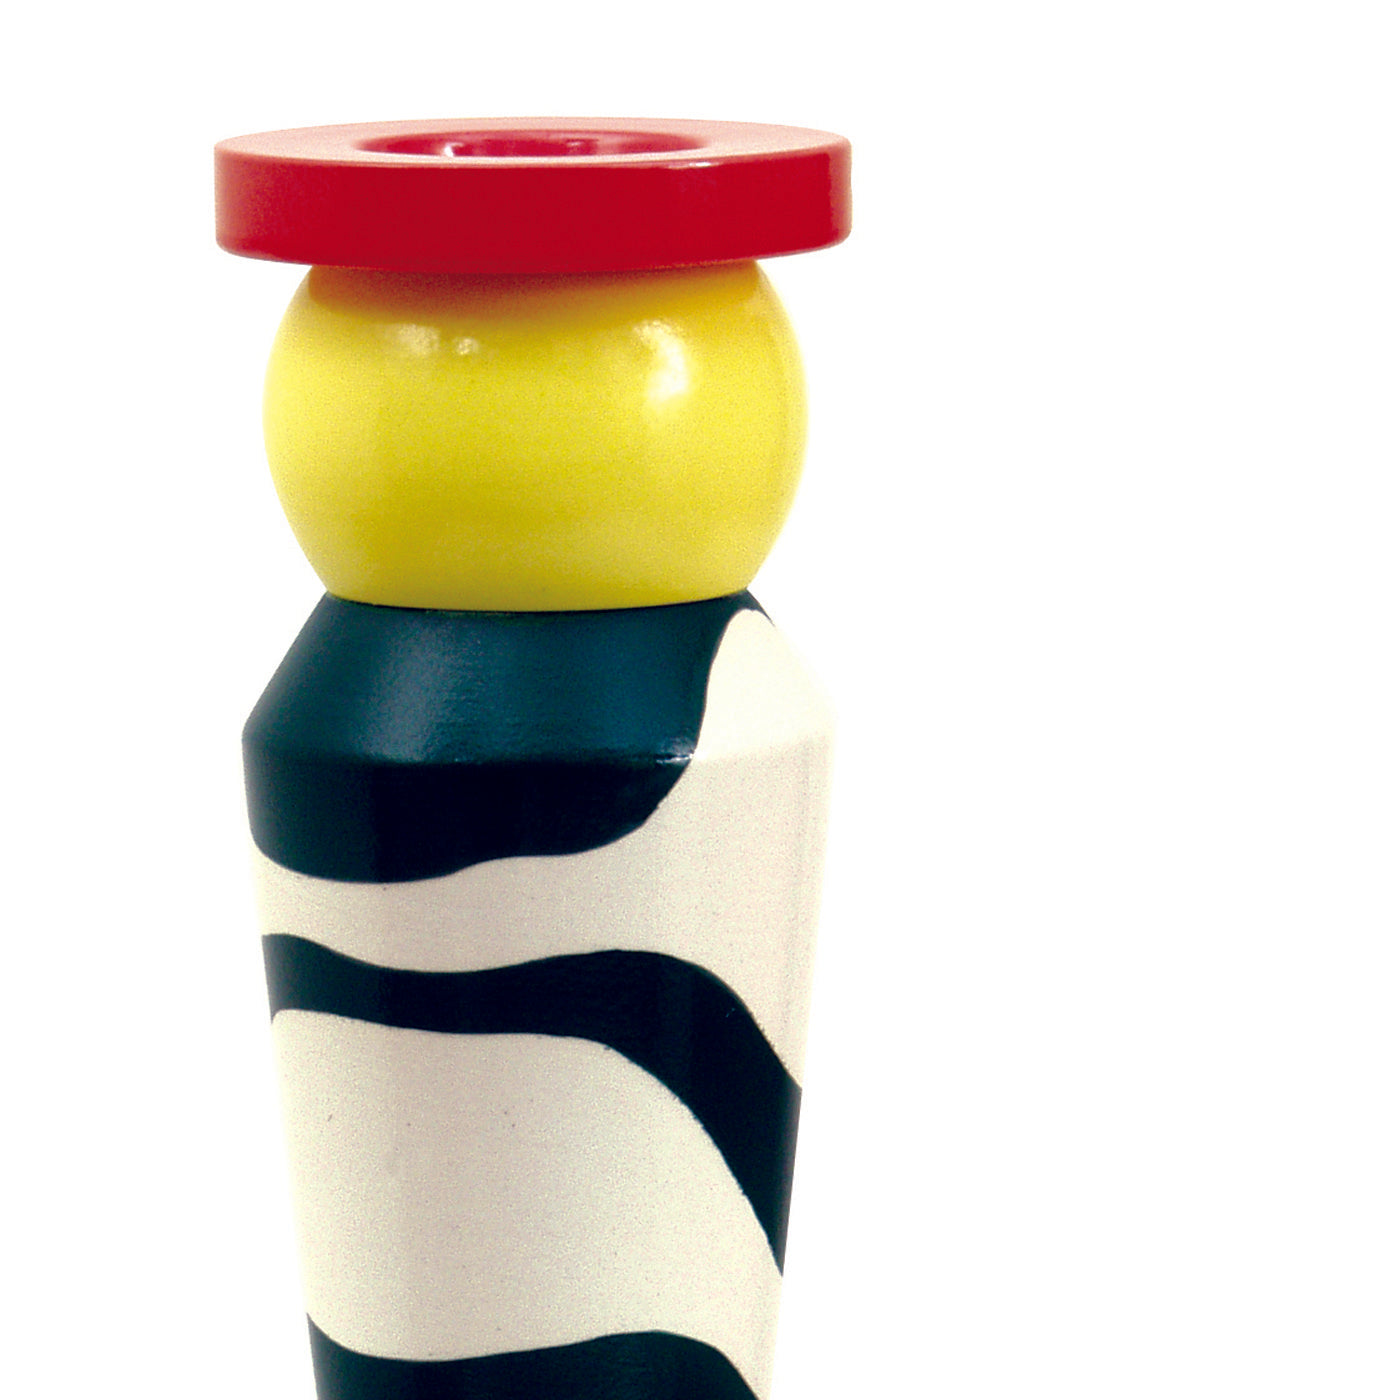 Red, Black and White Conic Vase by George J. Sowden - Alternative view 1